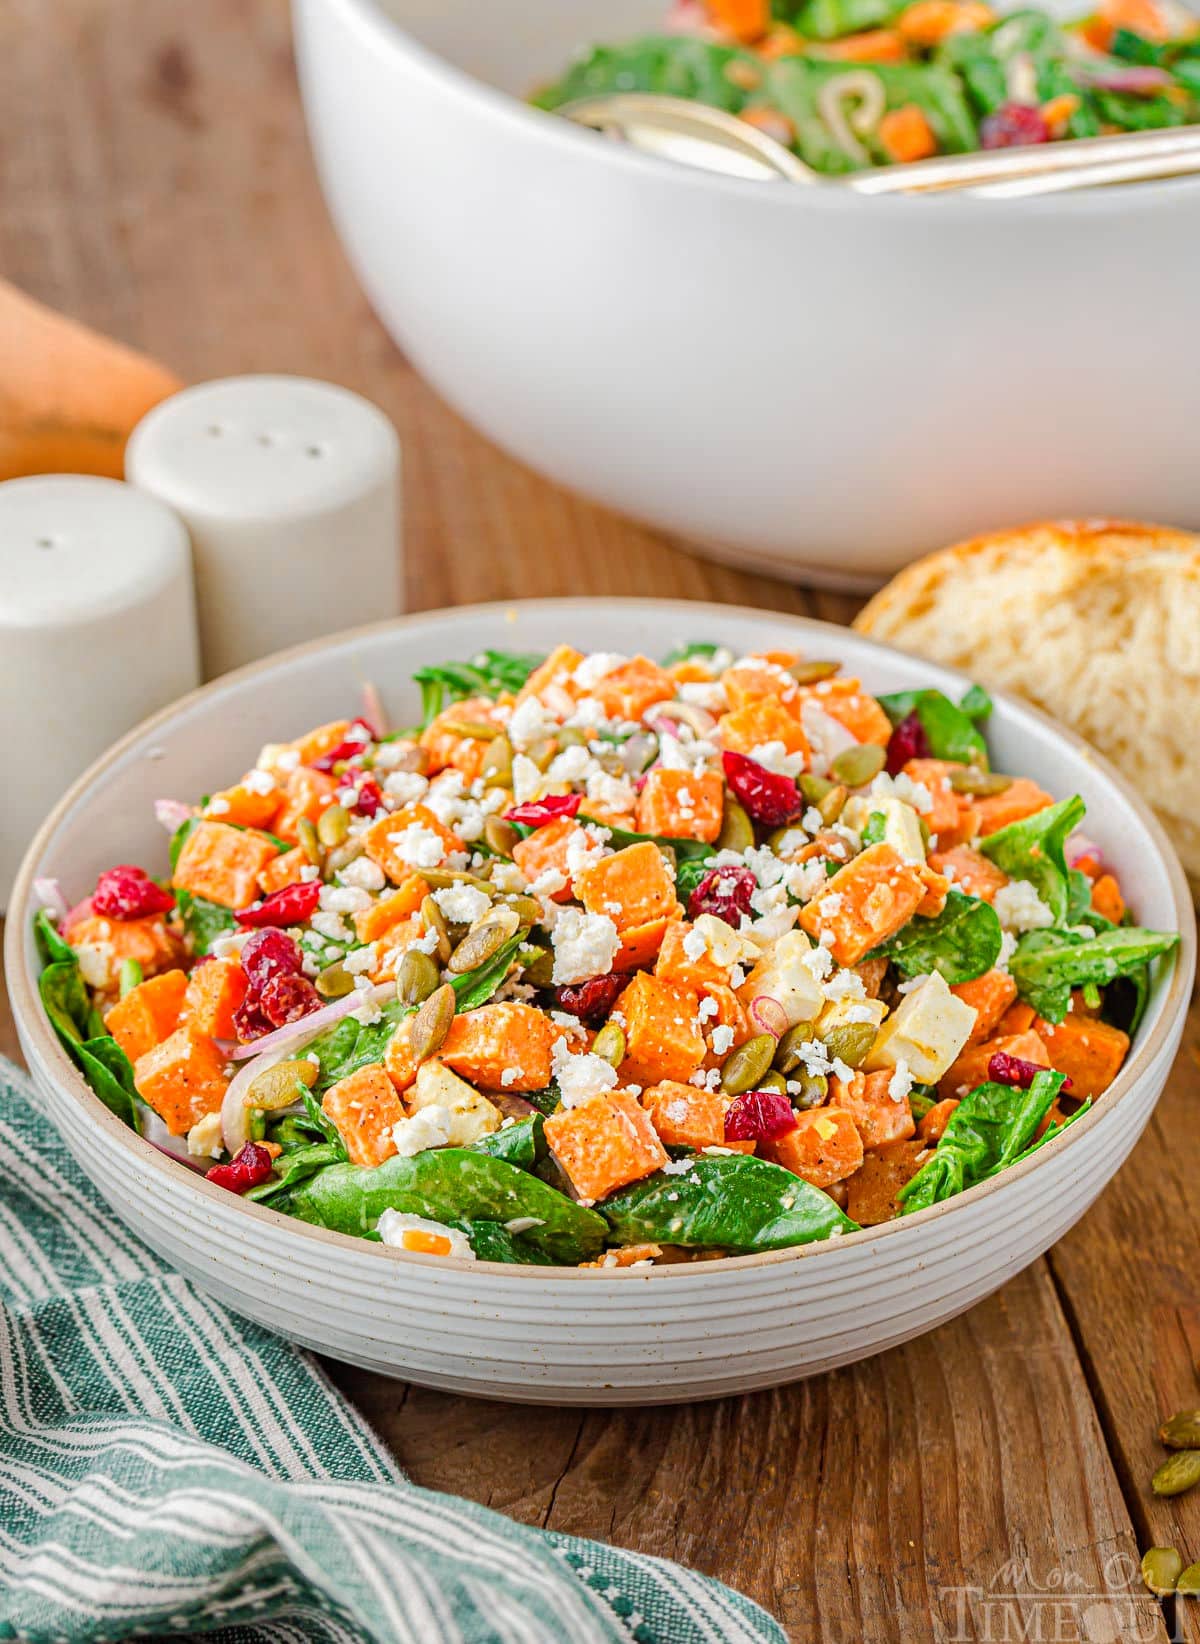 large bowl of sweet potato salad topped with roasted cubed sweet potatoes, dried cranberries, pepitas and feta cheese.